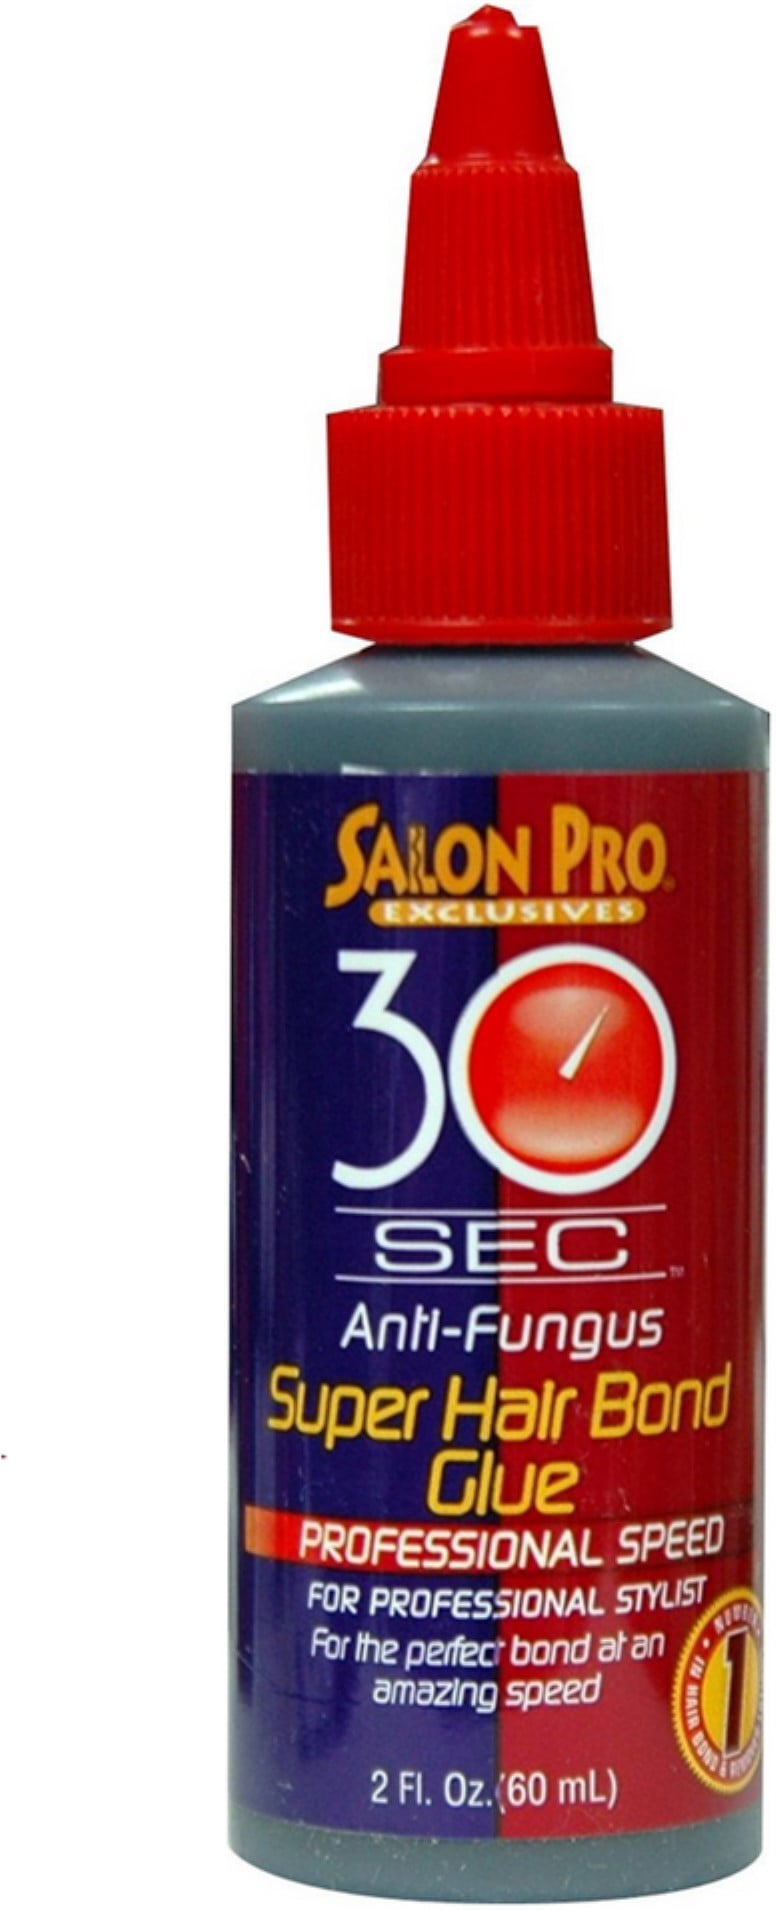 Buy Salon Pro 30 Second Hair Bonding Glue 2 oz Online at Lowest Price in  Ubuy Saint Helena, Ascension and Tristan da Cunha. 111274627